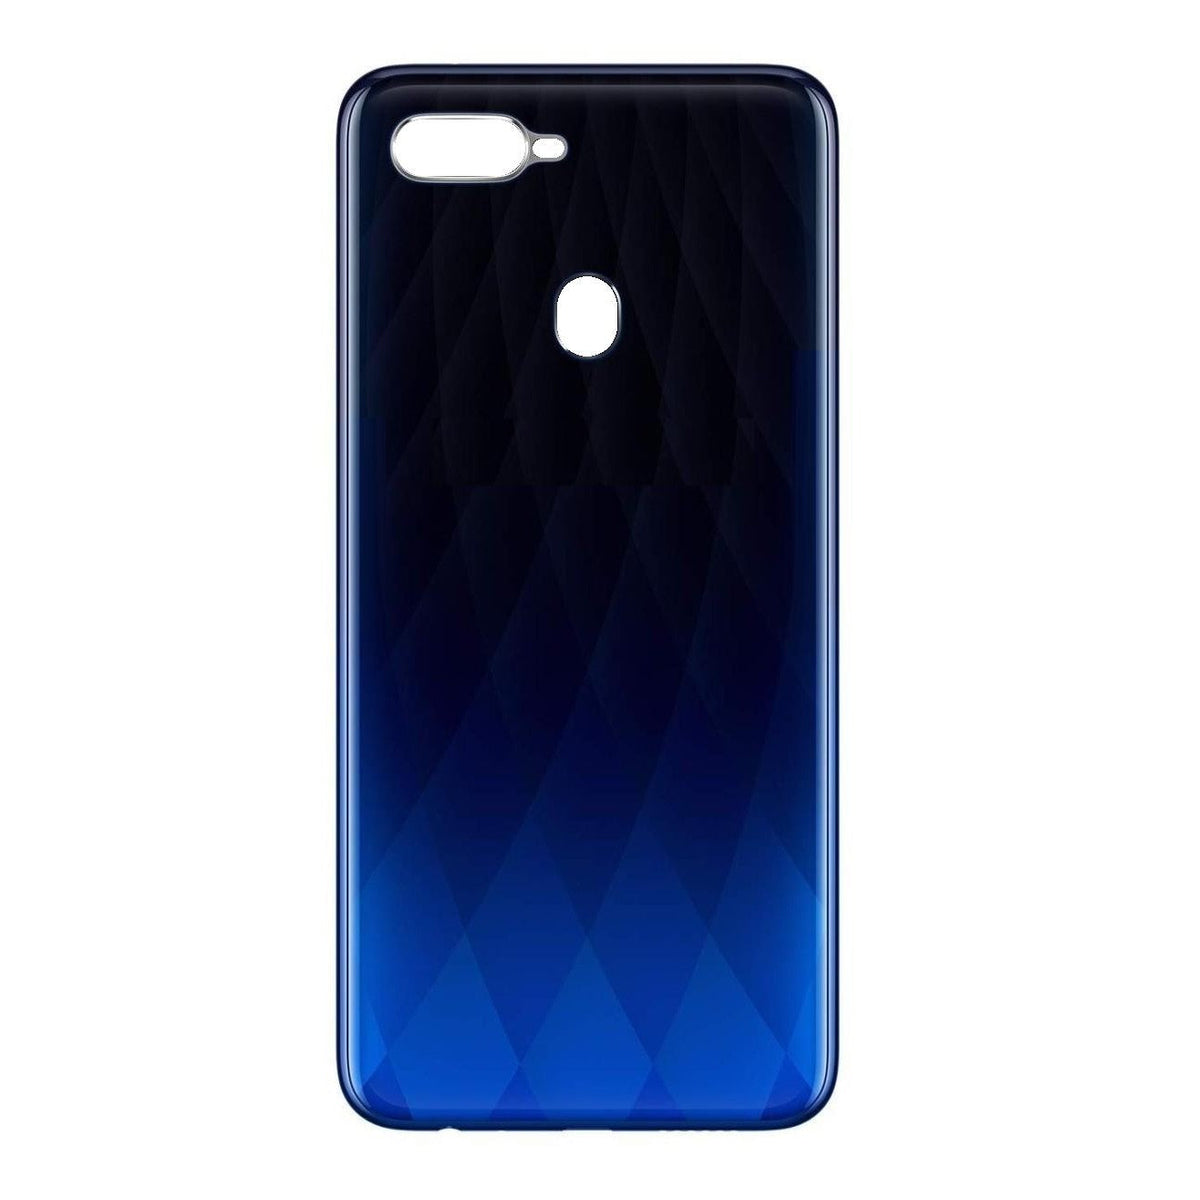 BACK PANEL COVER FOR OPPO F9 / F9 PRO